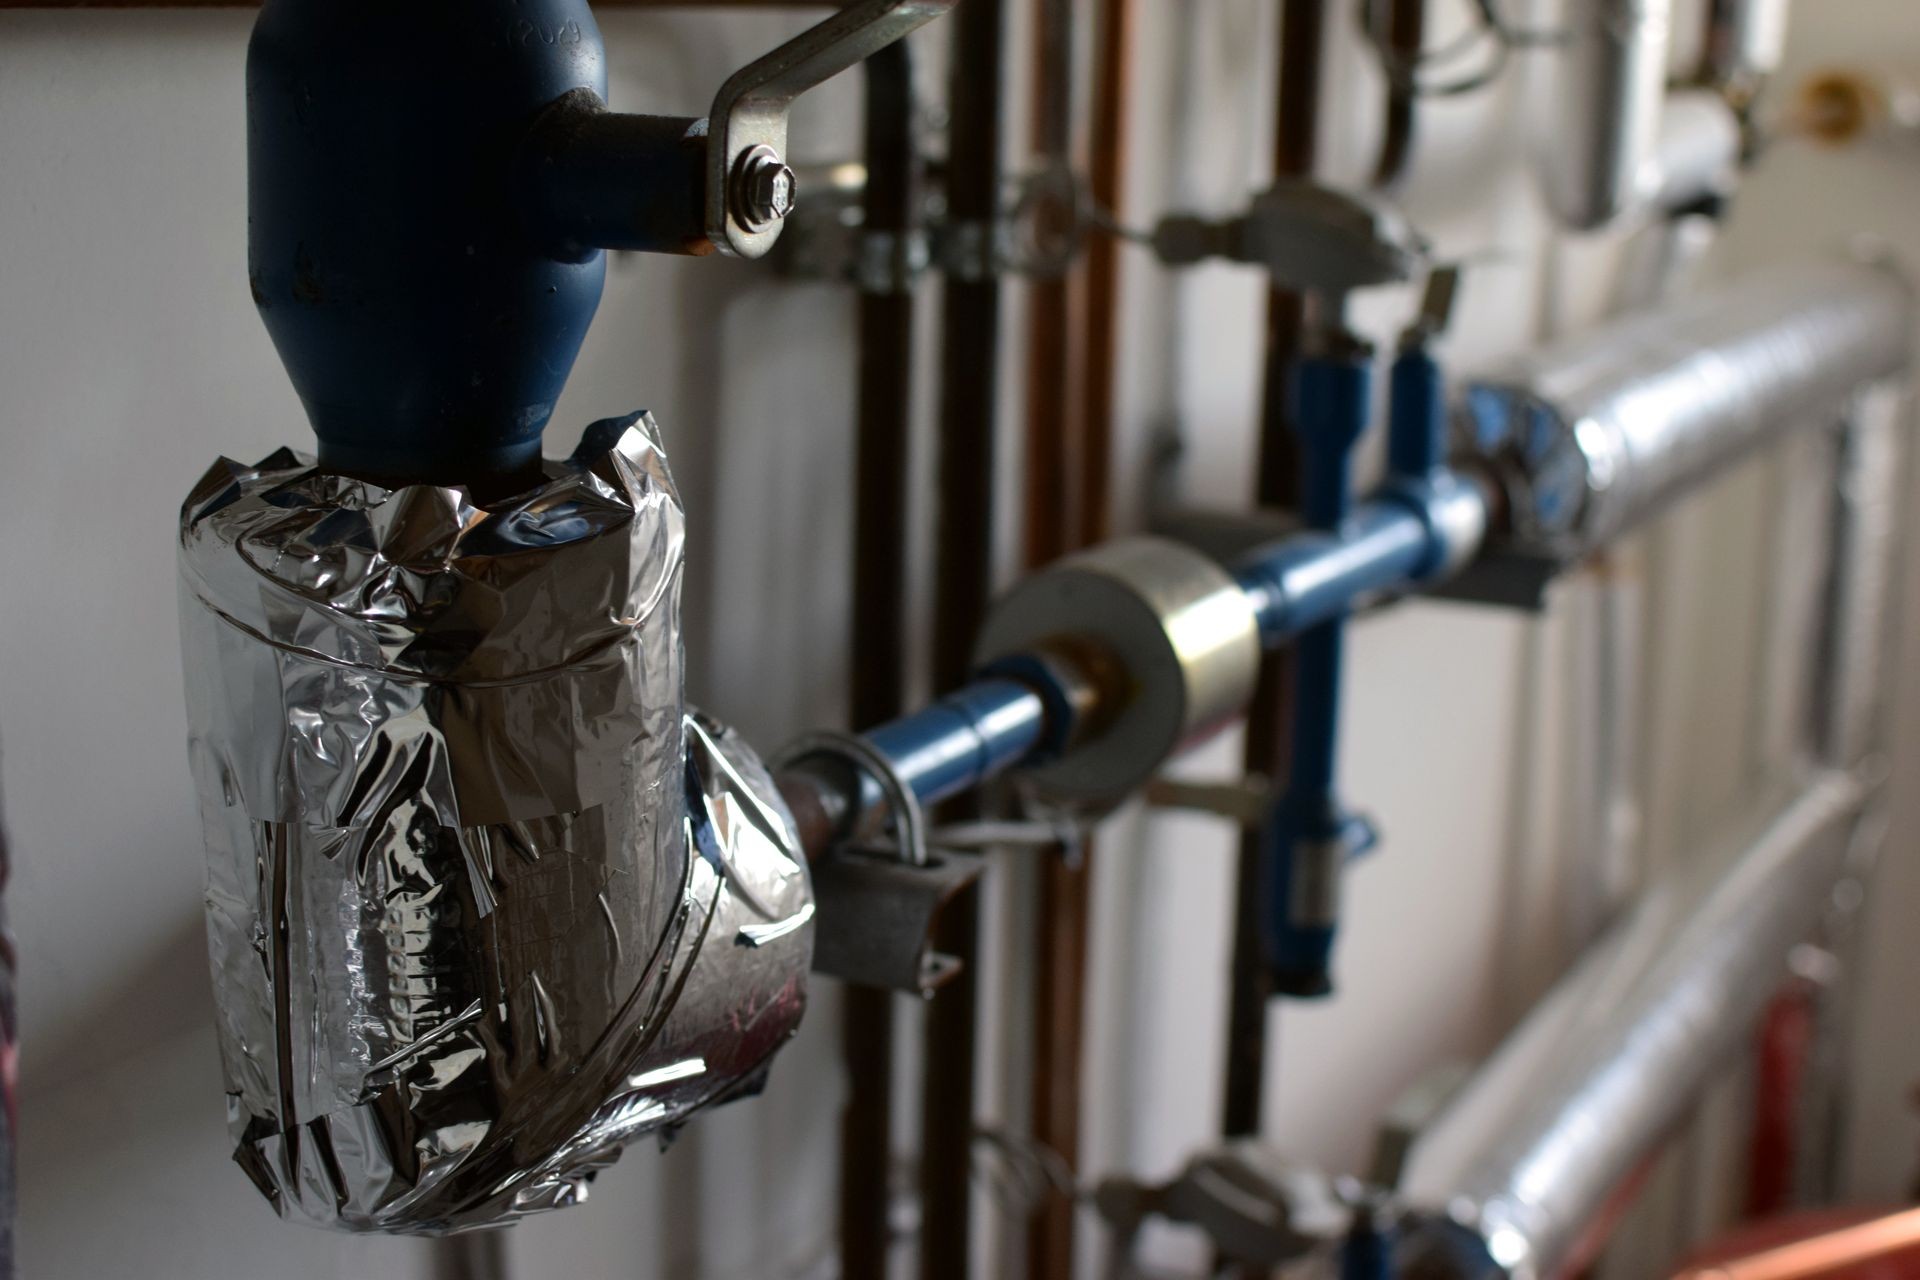 Close up of pipes in heating system. Horizontal image, focus on foreground.